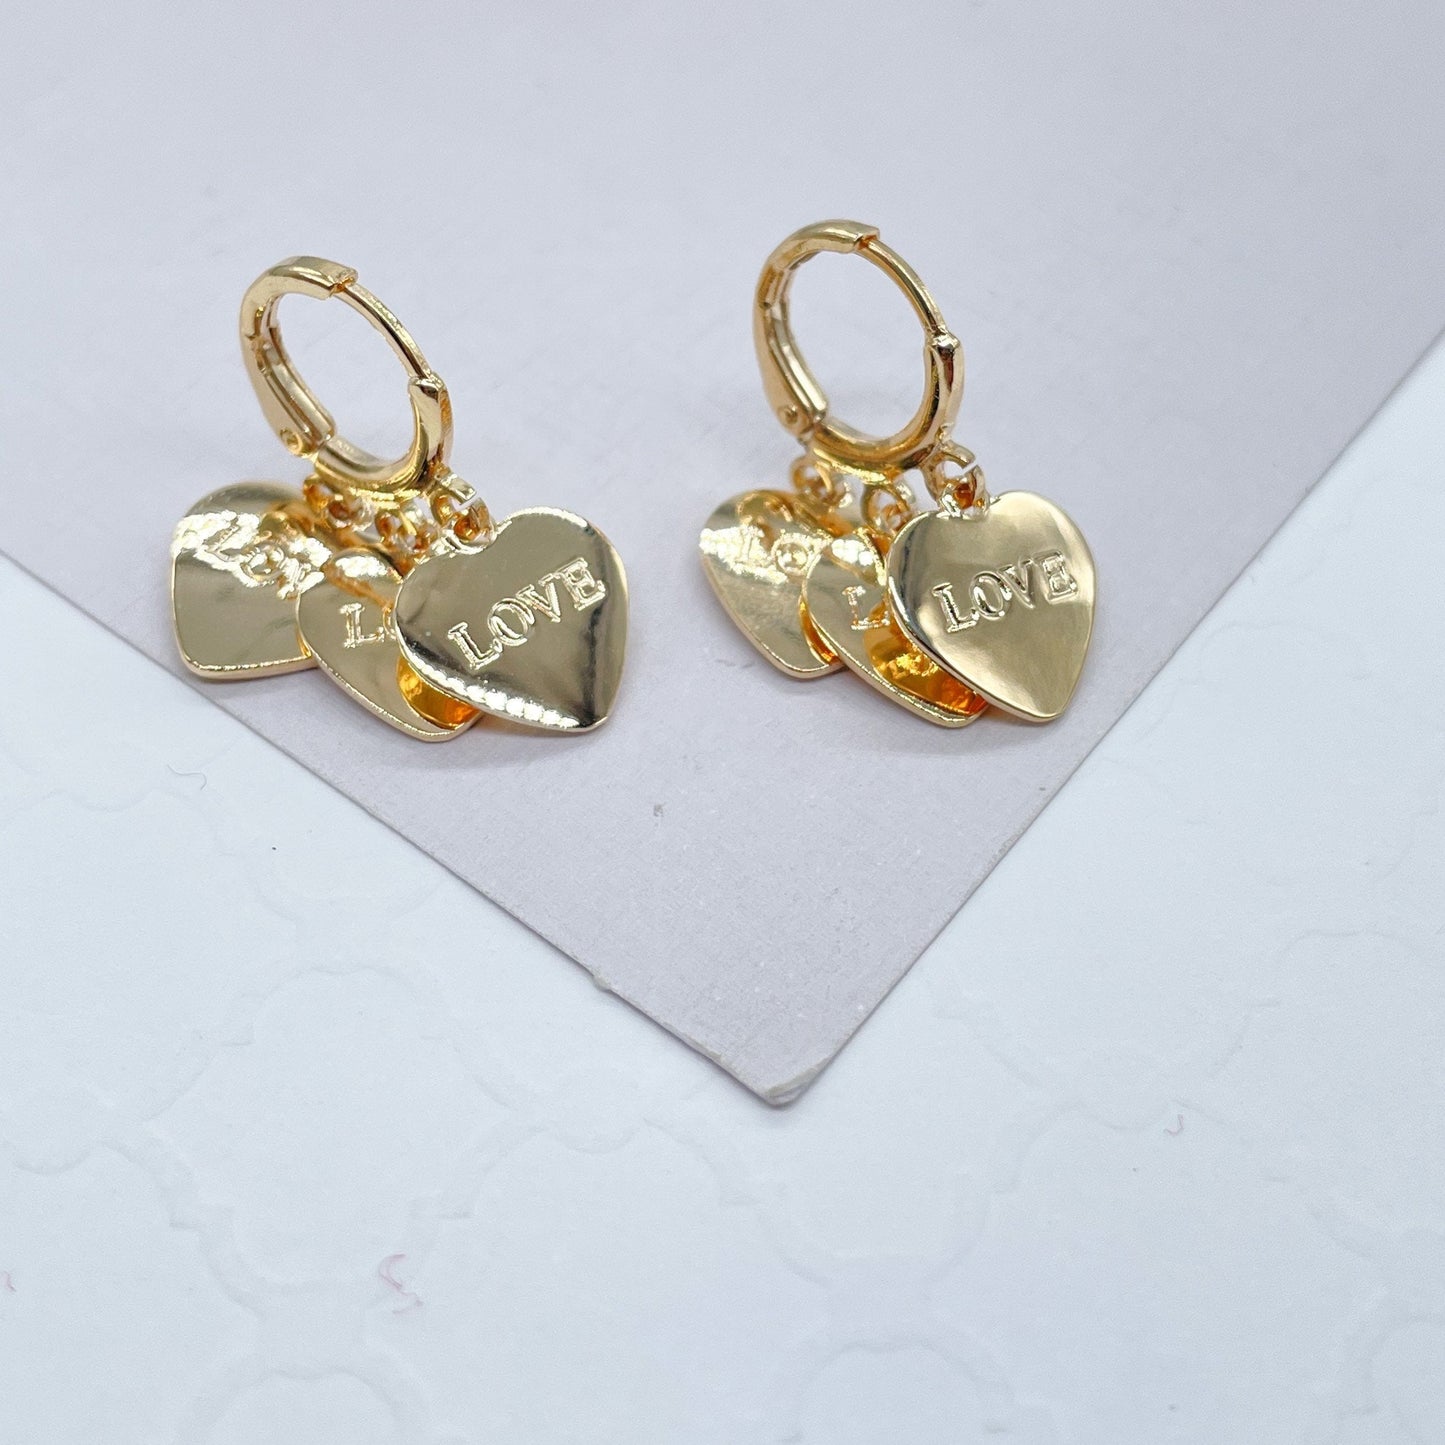 18k Gold Filled Chandelier Earrings With Double Side Charms of “Love & Amor”